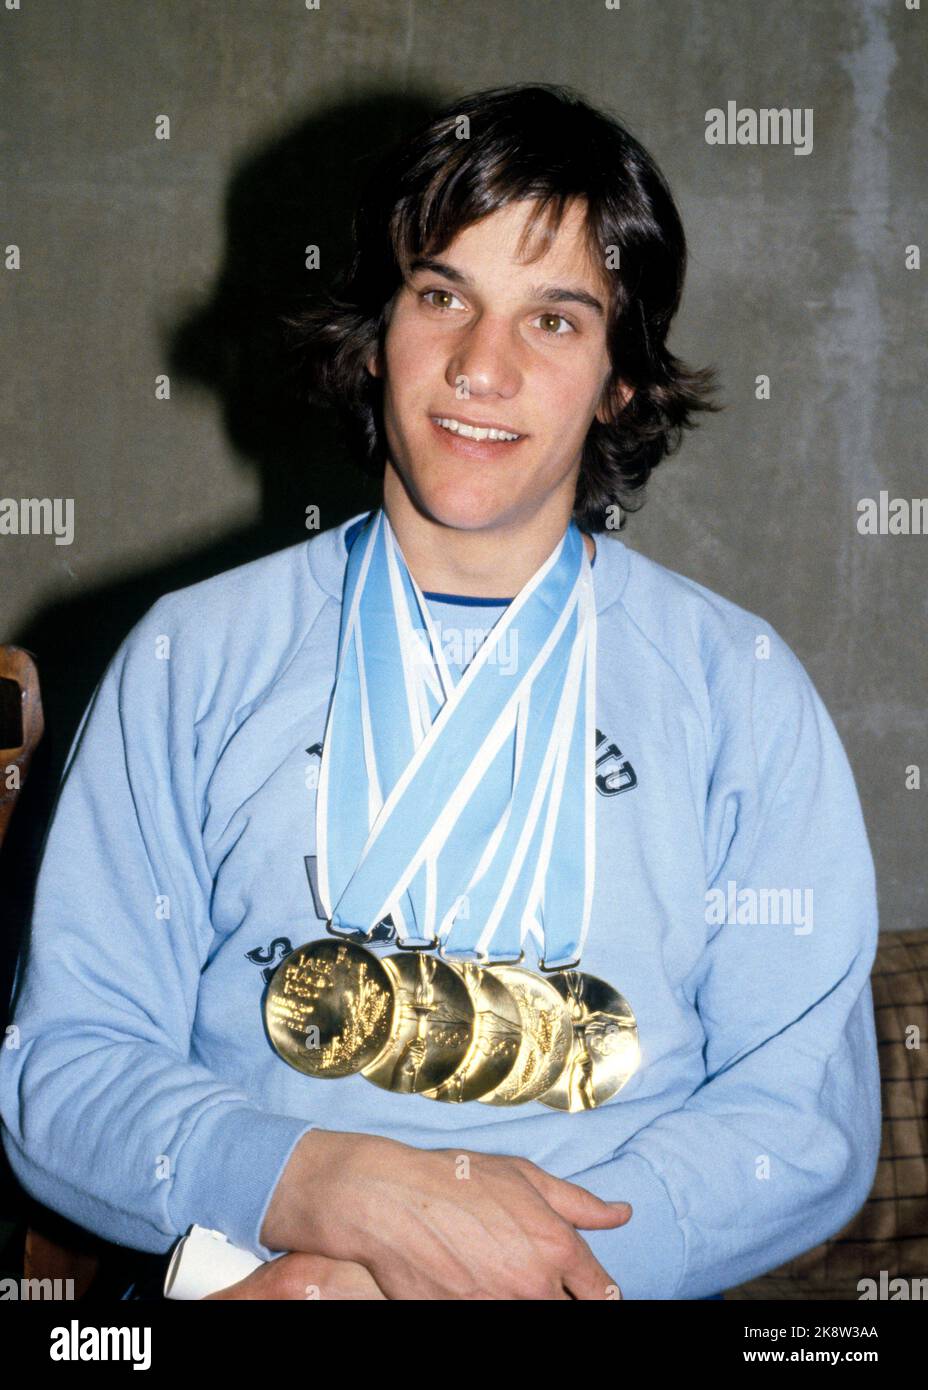 Lake Placid, N.Y., USA, 198002: Olympic Lake Placid 1980. Picture: Skater Eric Heiden (USA) photographed with its impressive 5 gold medals. He won all distances, 500m, 1000m, 1500m, 5000m and 10,000m during the 1980 Winter Olympics. Photo: EPU / NTB / NTB Stock Photo